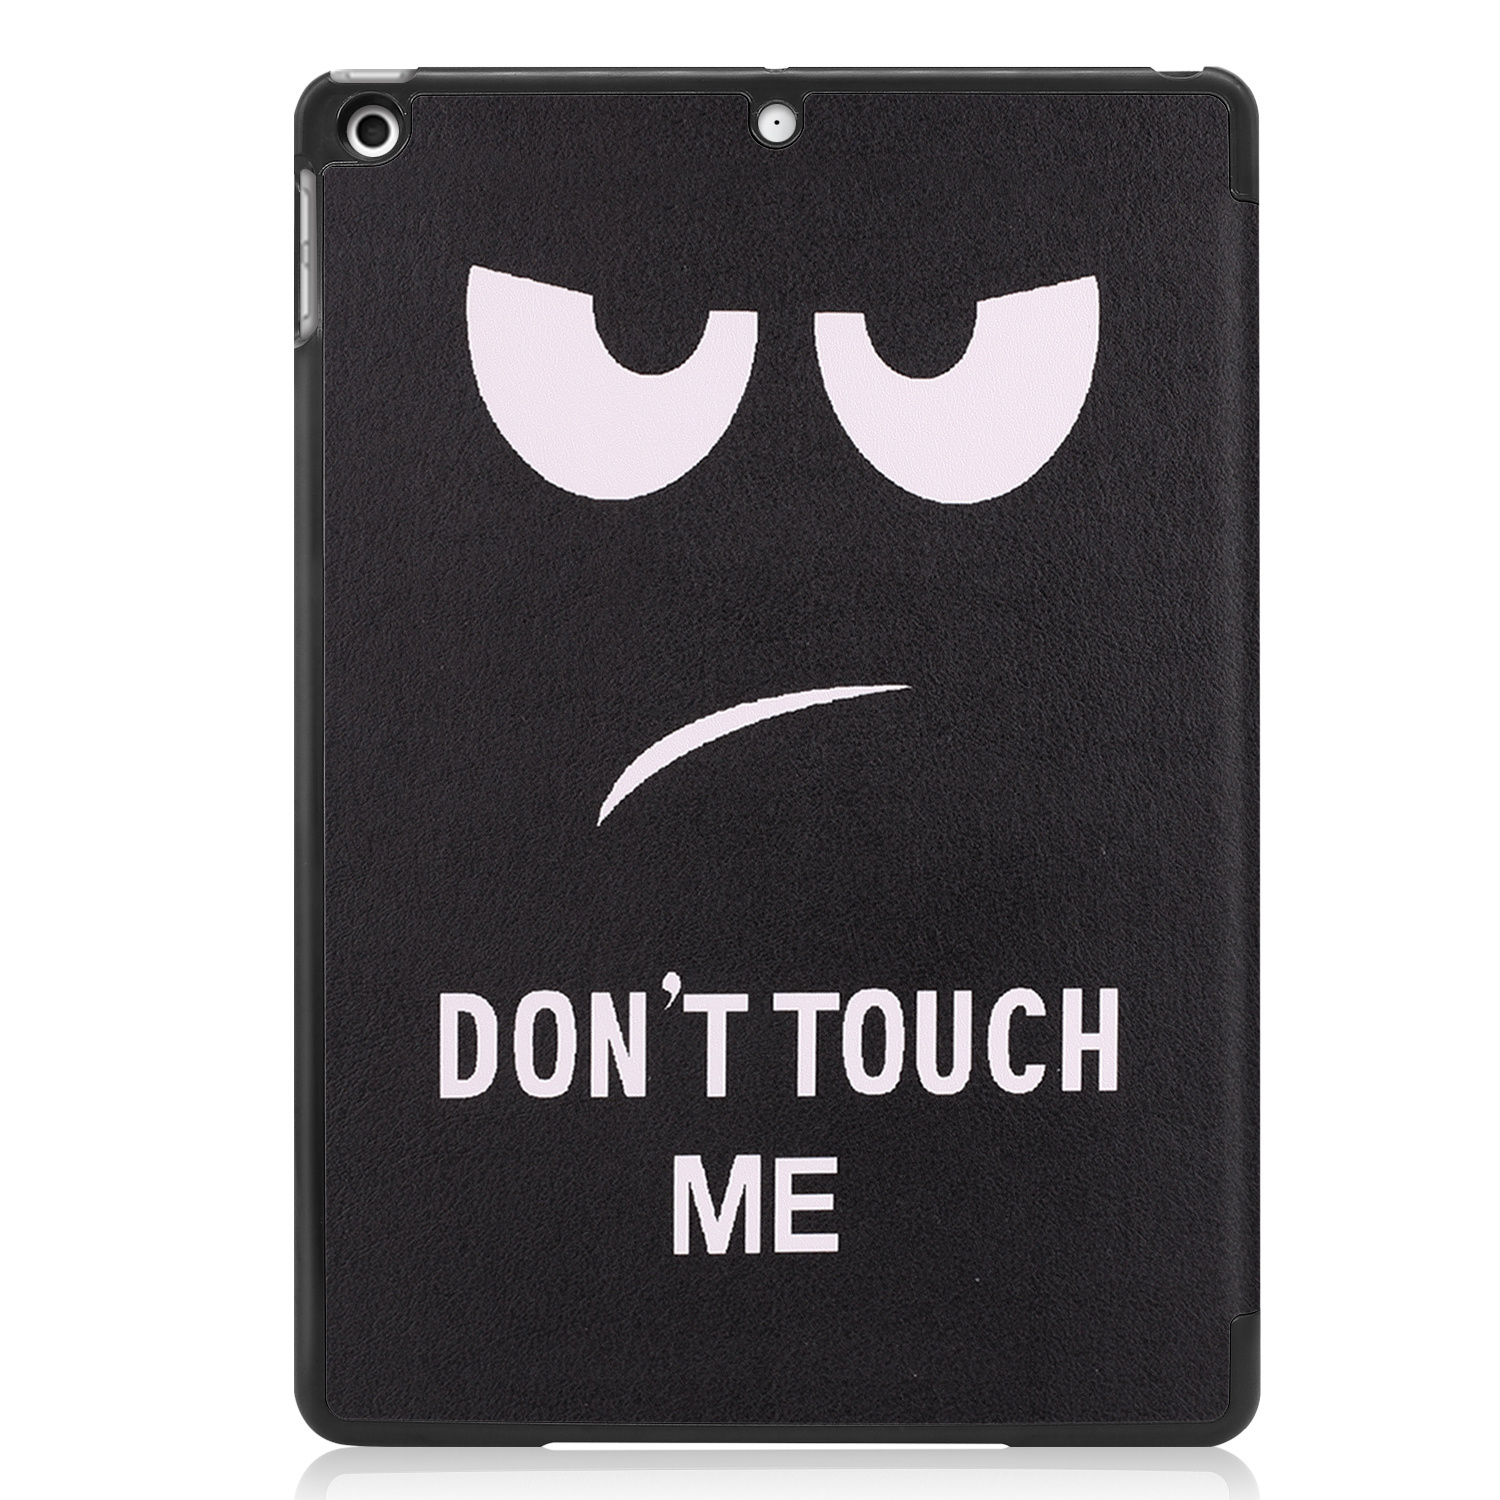 Nomfy iPad 10.2 2019 Hoesje Book Case Hoes - iPad 10.2 2019 Hoes Hardcover Case Hoesje - Don't Touch Me